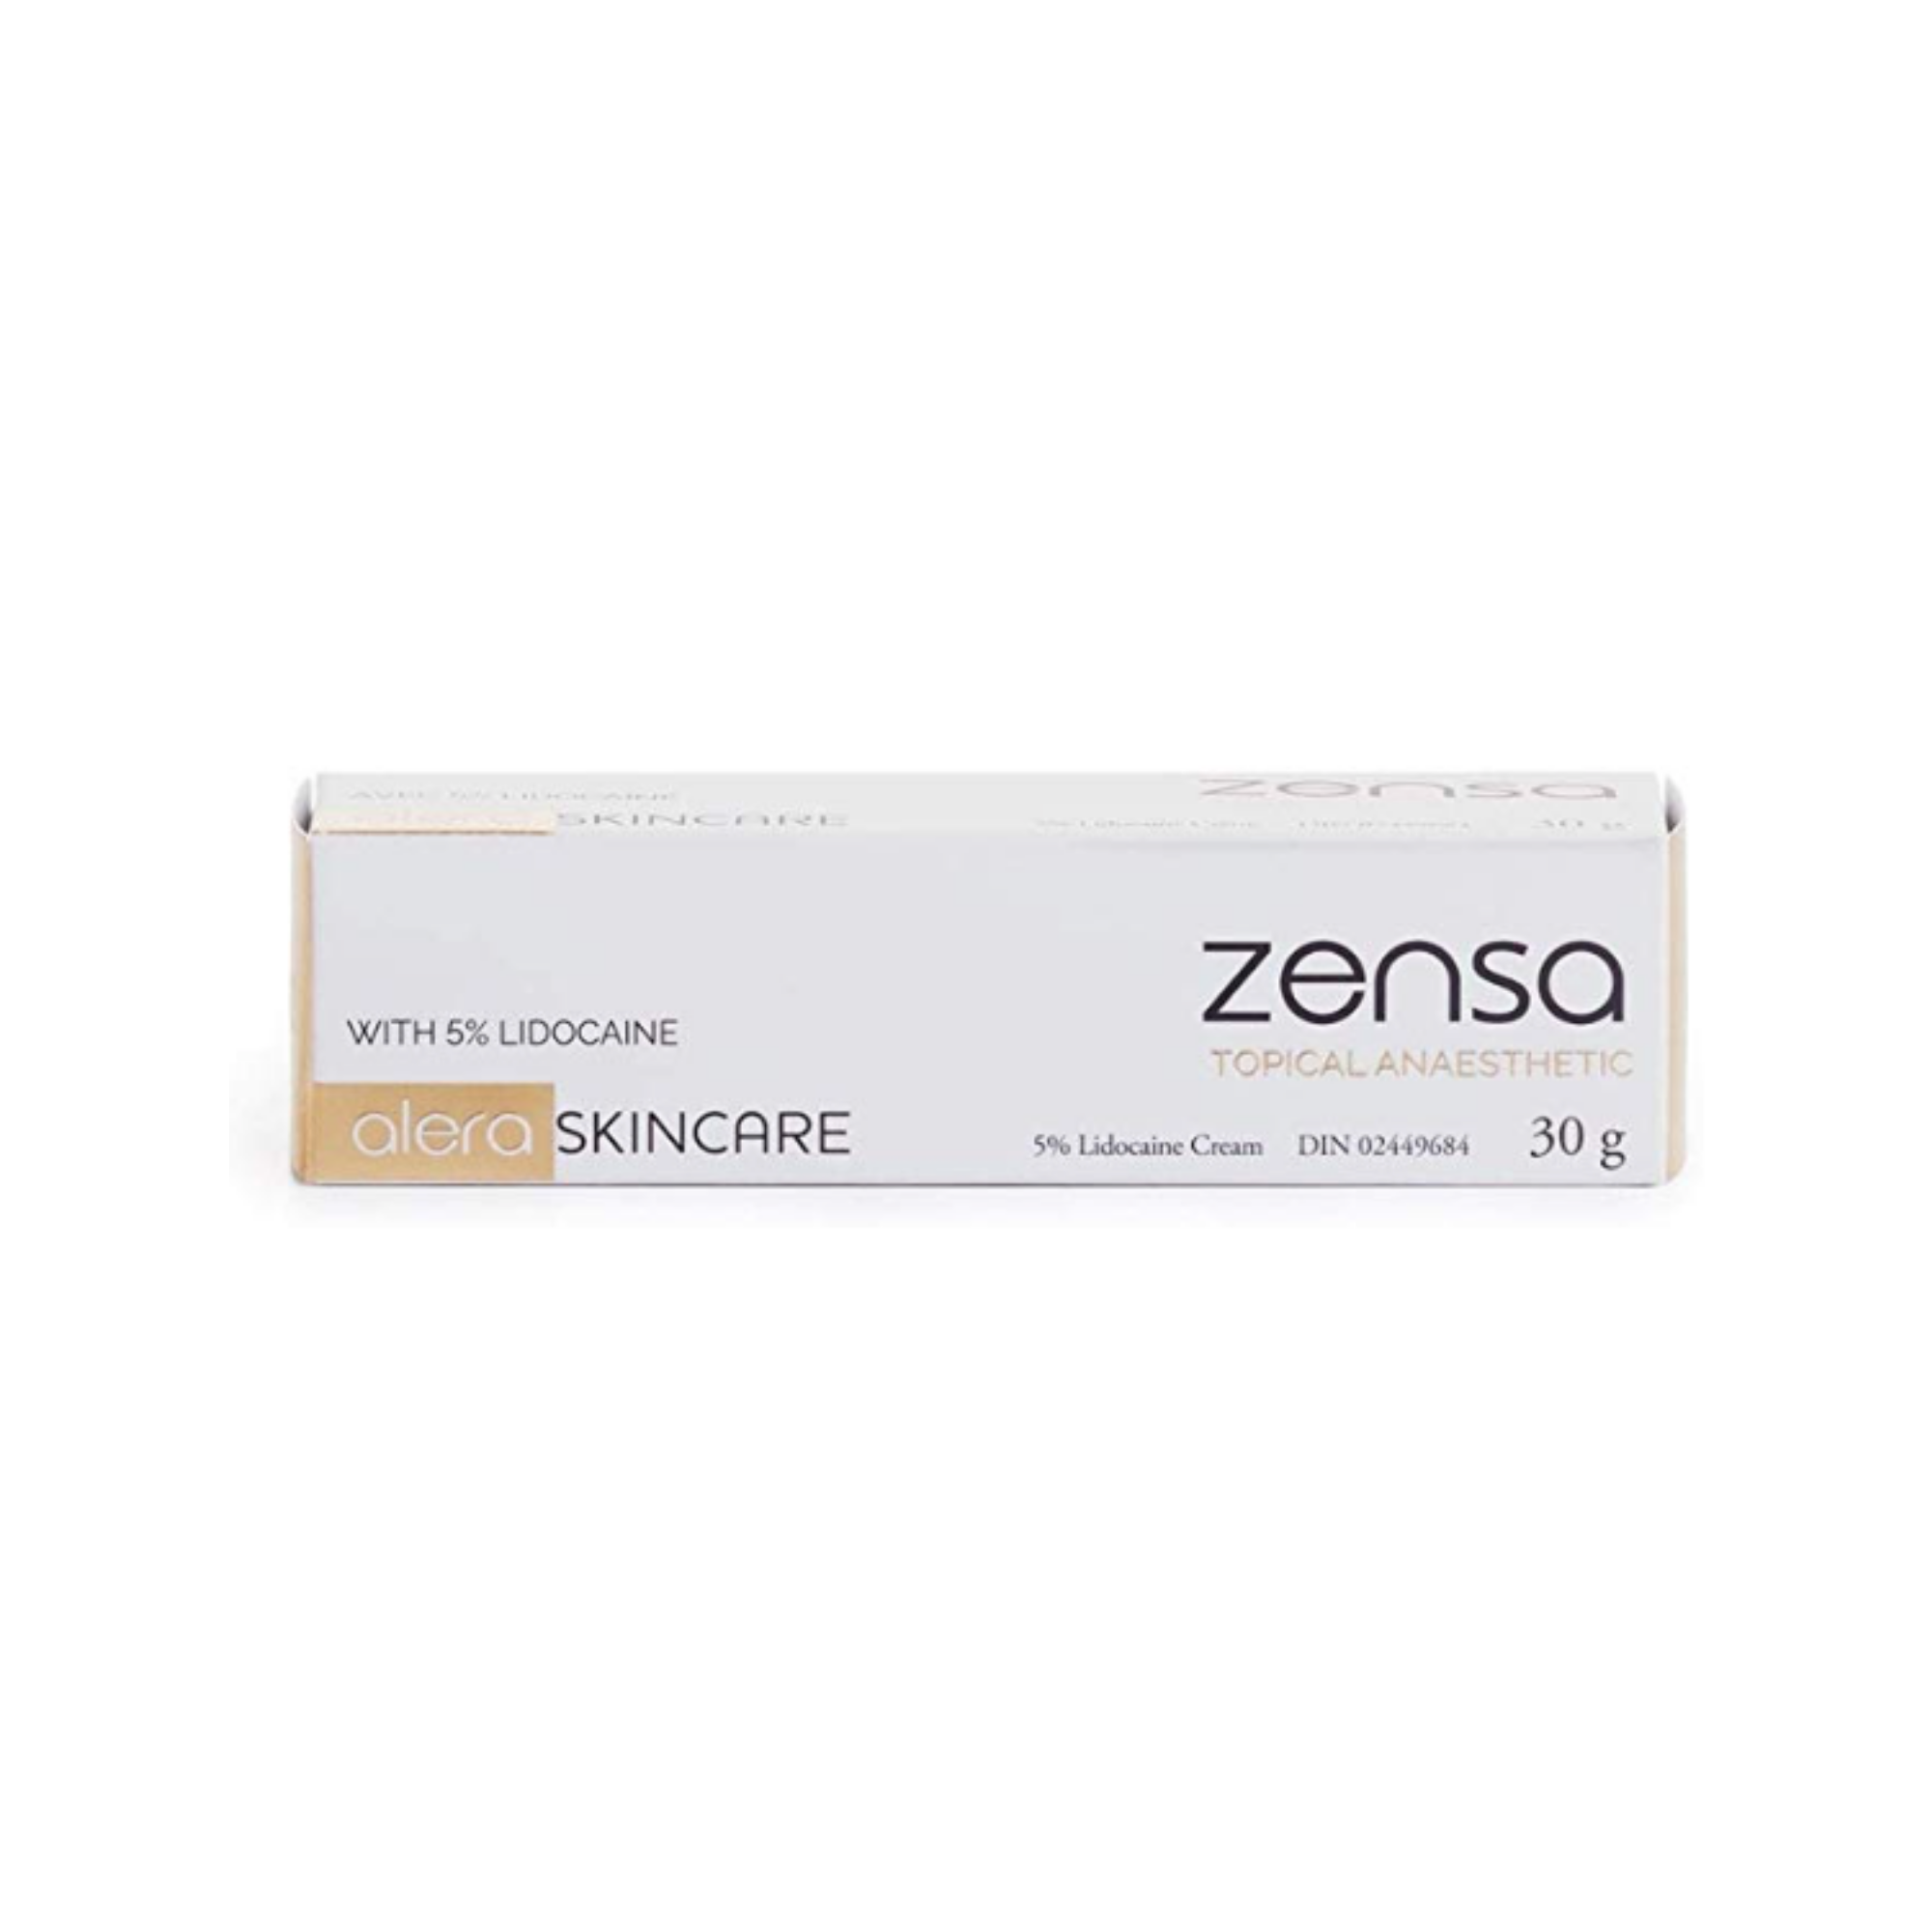 Zensa Numbing cream packaging - numbing cream for hair removal, waxing and laser.